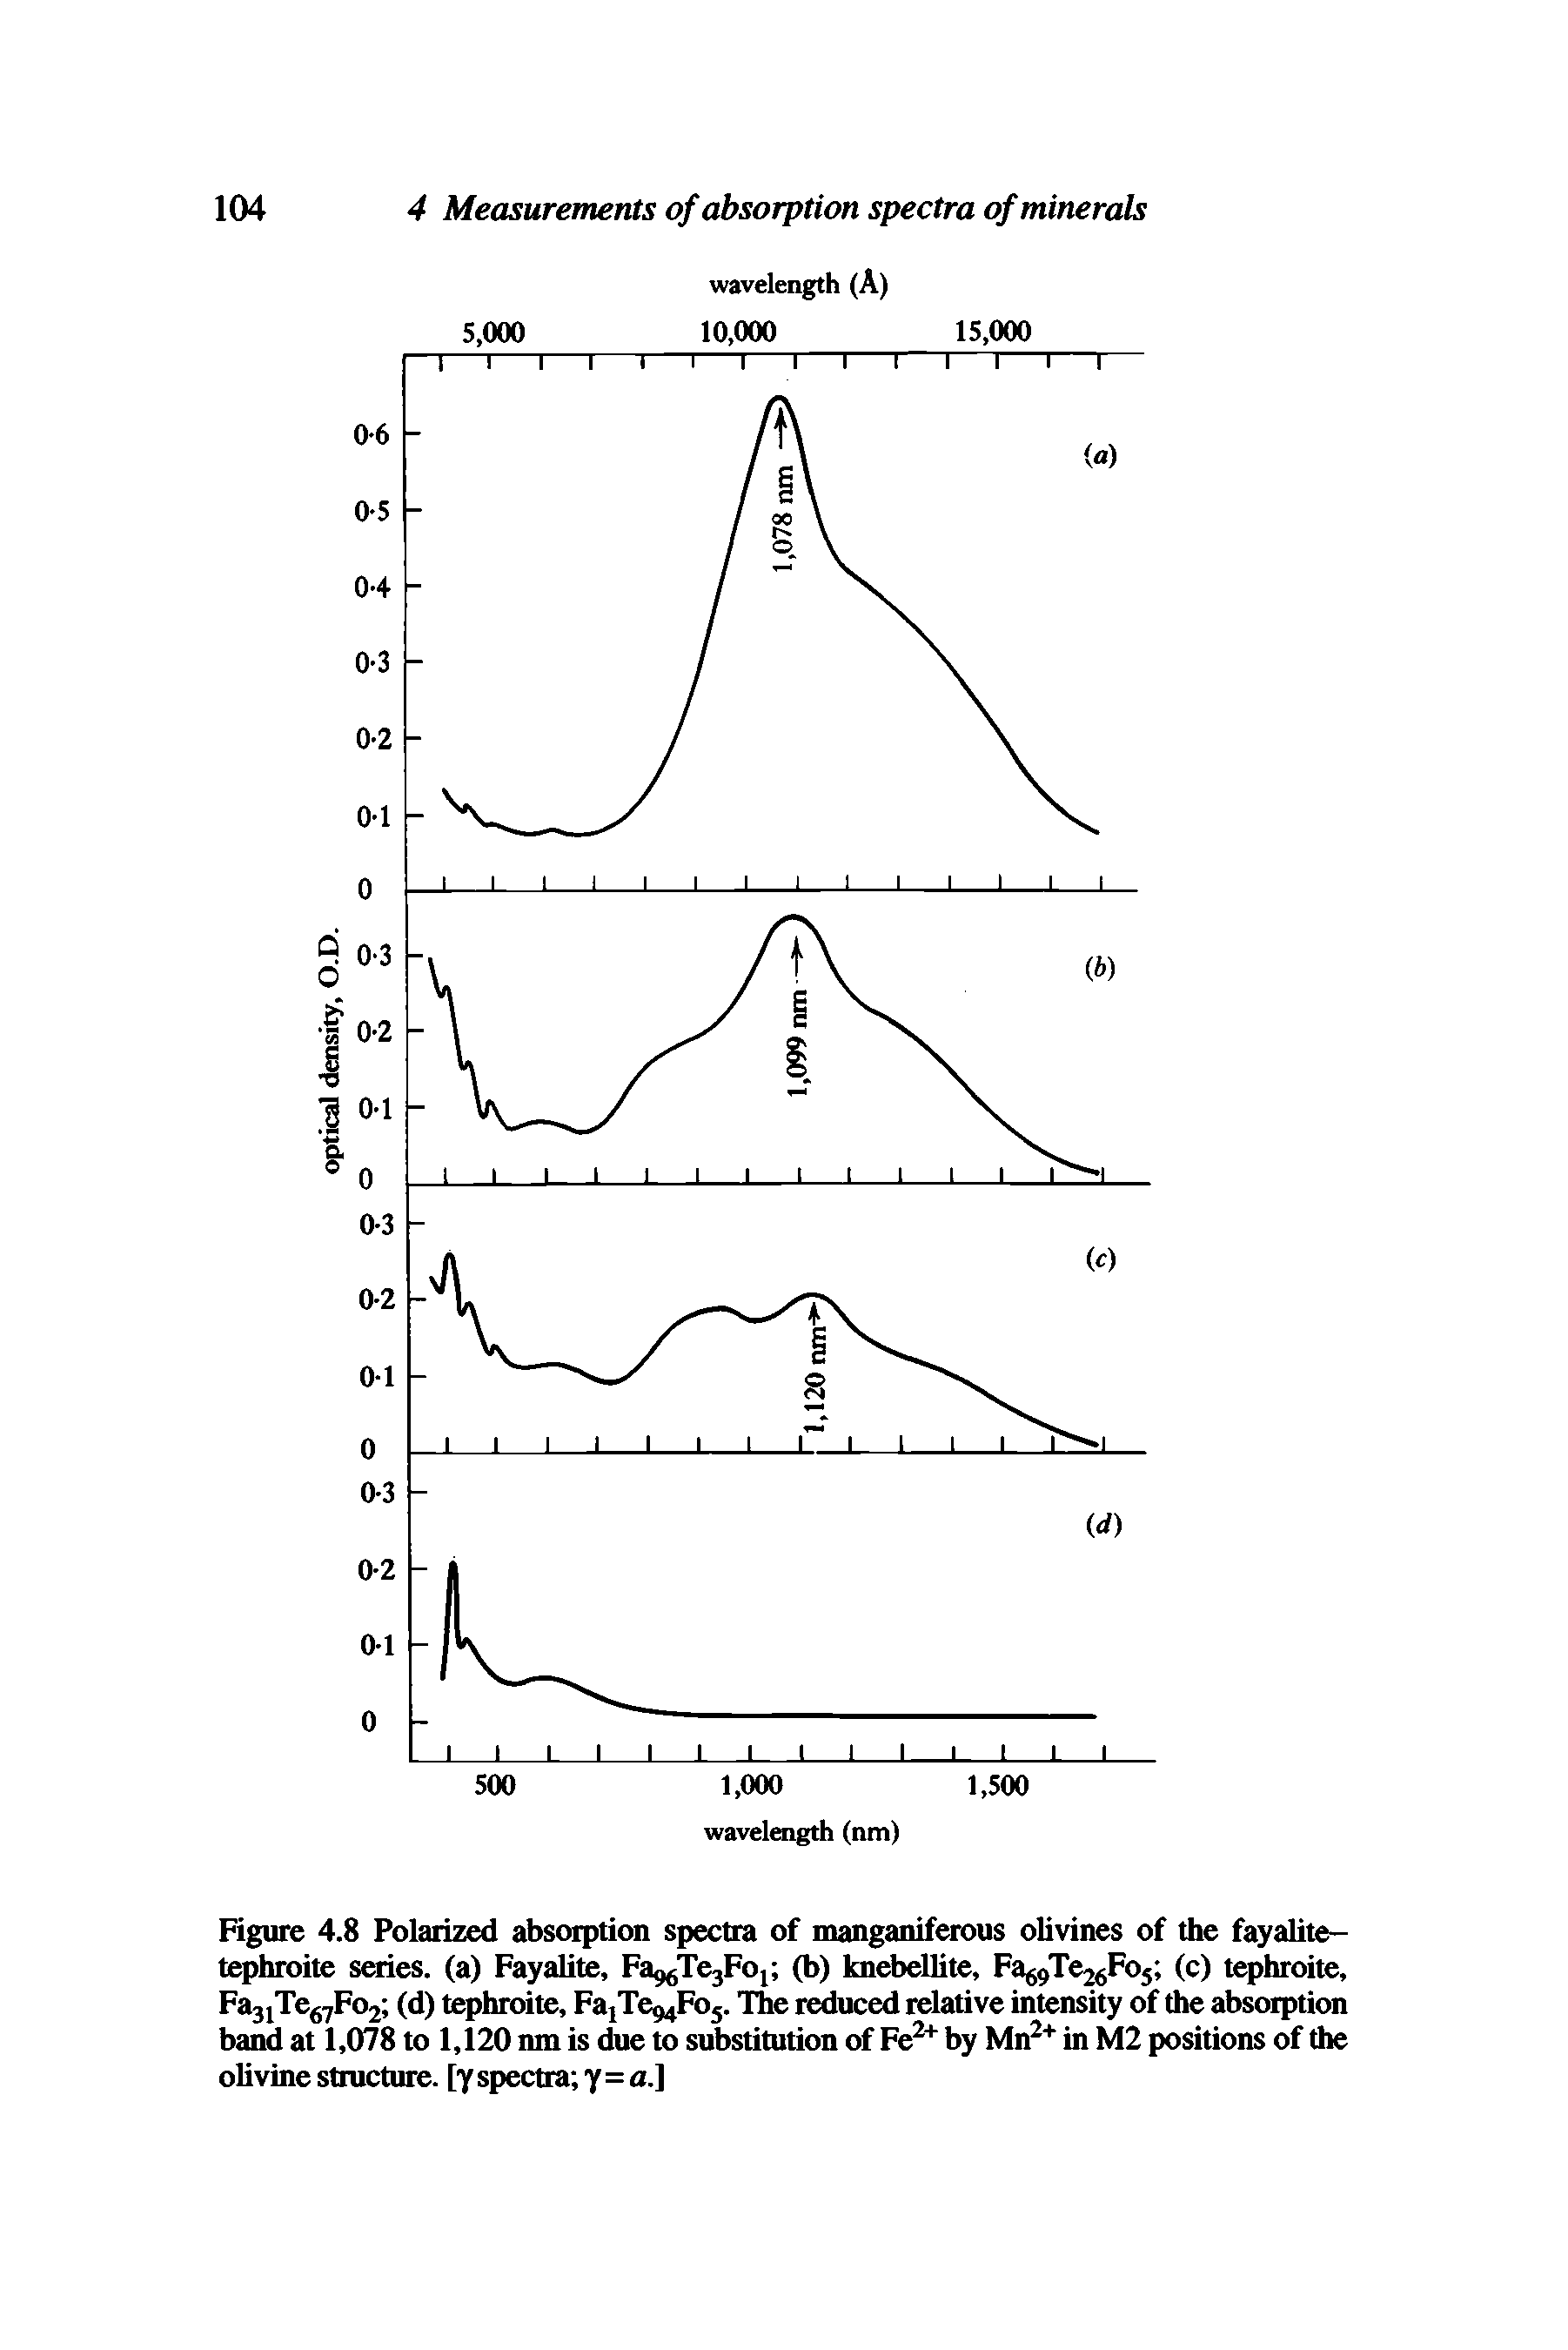 Figure 4.8 Polarized absorption spectra of manganiferous olivines of the fayalite-tephroite series, (a) Fayalite, Fa TejFop (b) knebellite, Fa69Te26Fo5 (c) tephroite, Fa31Te67Fo2 (d) tephroite, FajTe Foj. The reduced relative intensity of the absorption band at 1,078 to 1,120 nm is due to substitution of Fe2+ by Mn2+ in M2 positions of the olivine structure, [y spectra y=a.]...